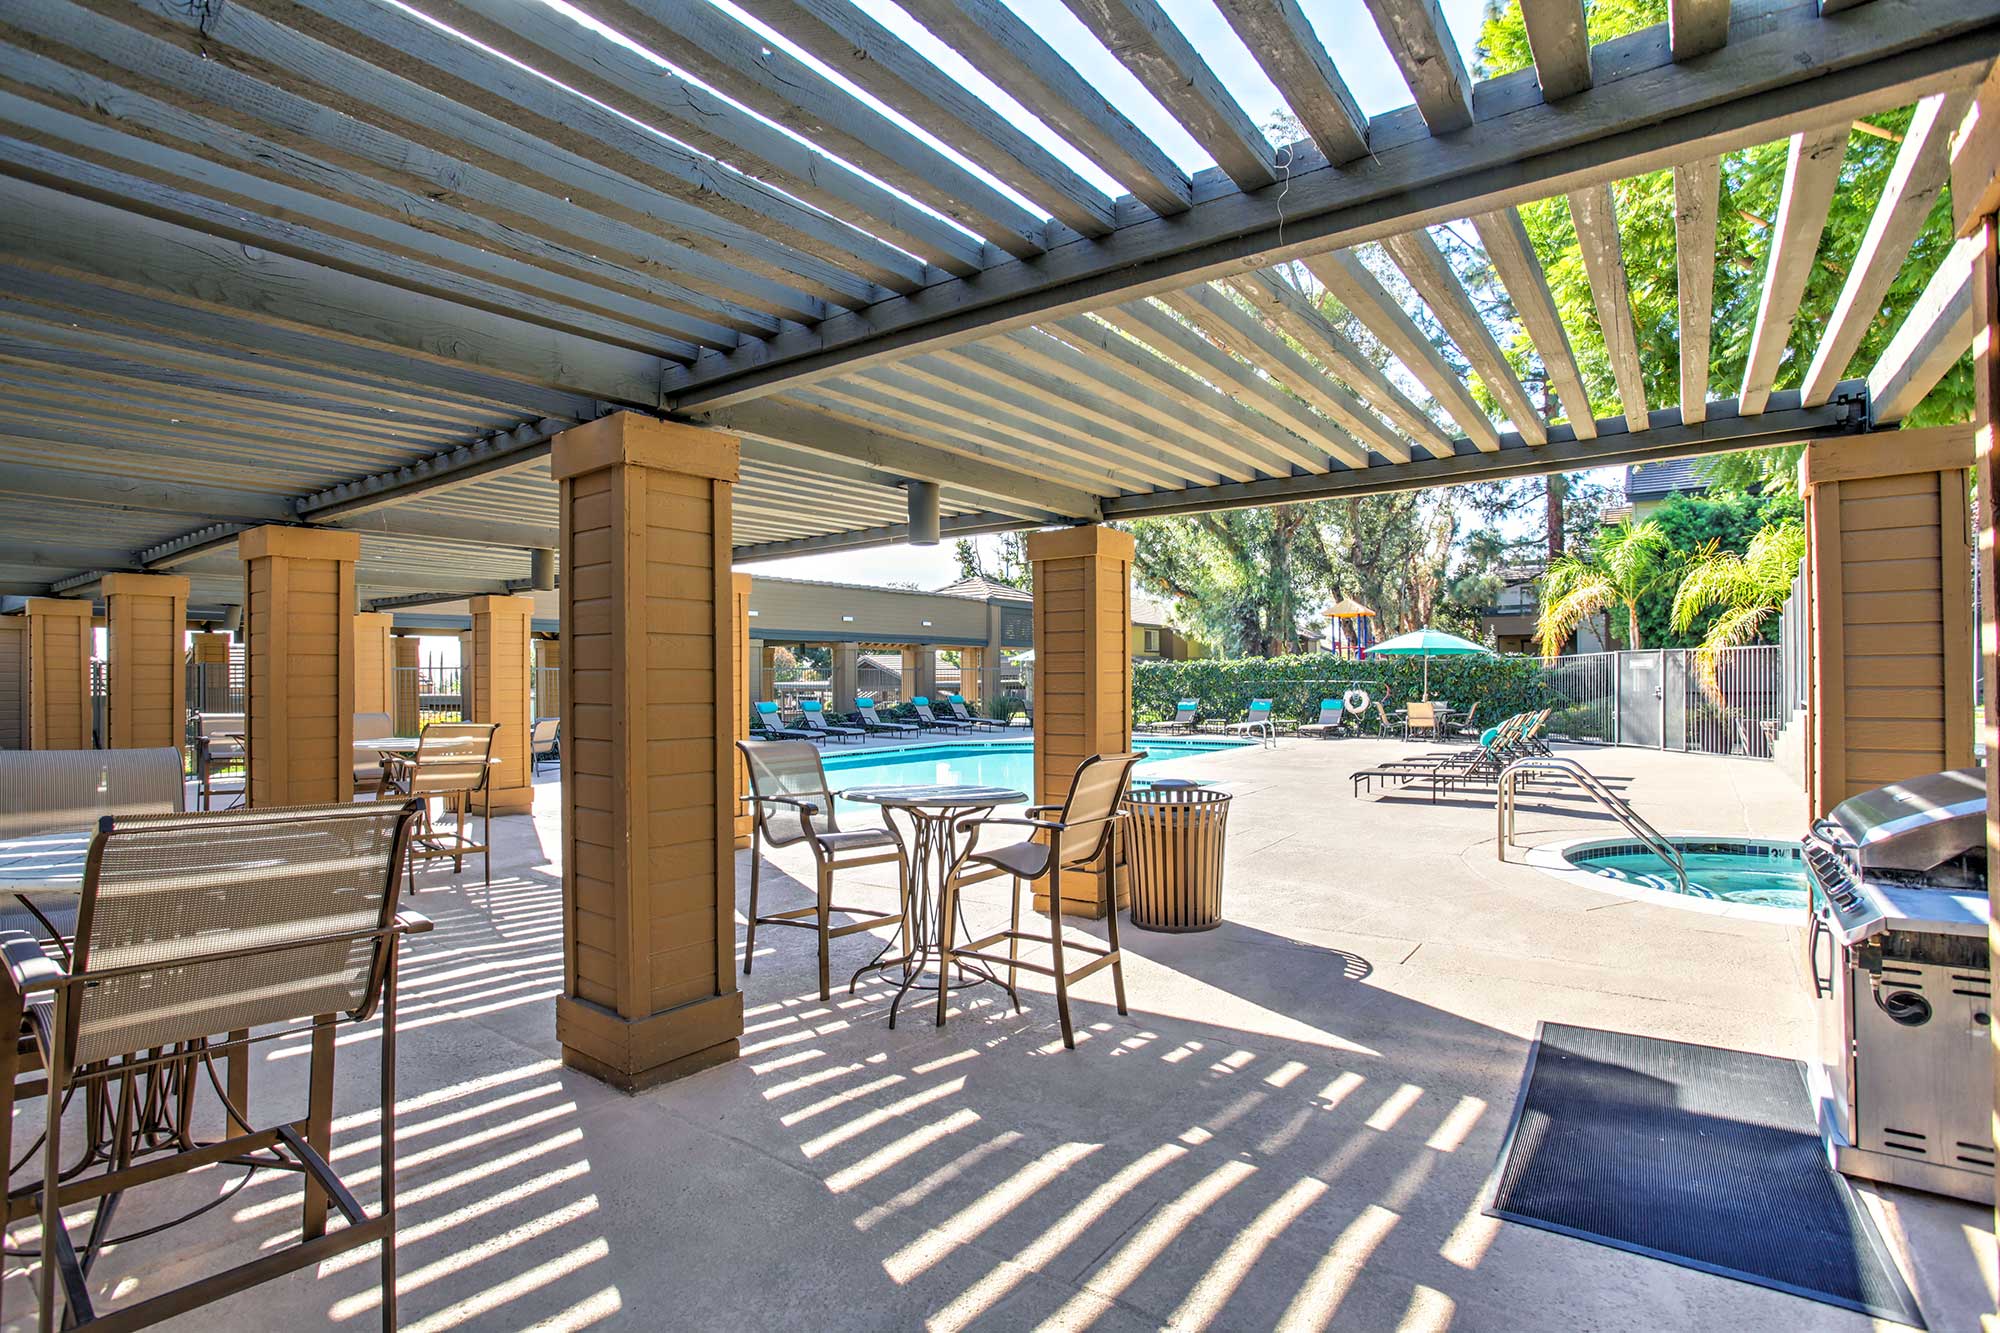 Waterstone Alta Loma Apartments community pool and lounge area with barbecue